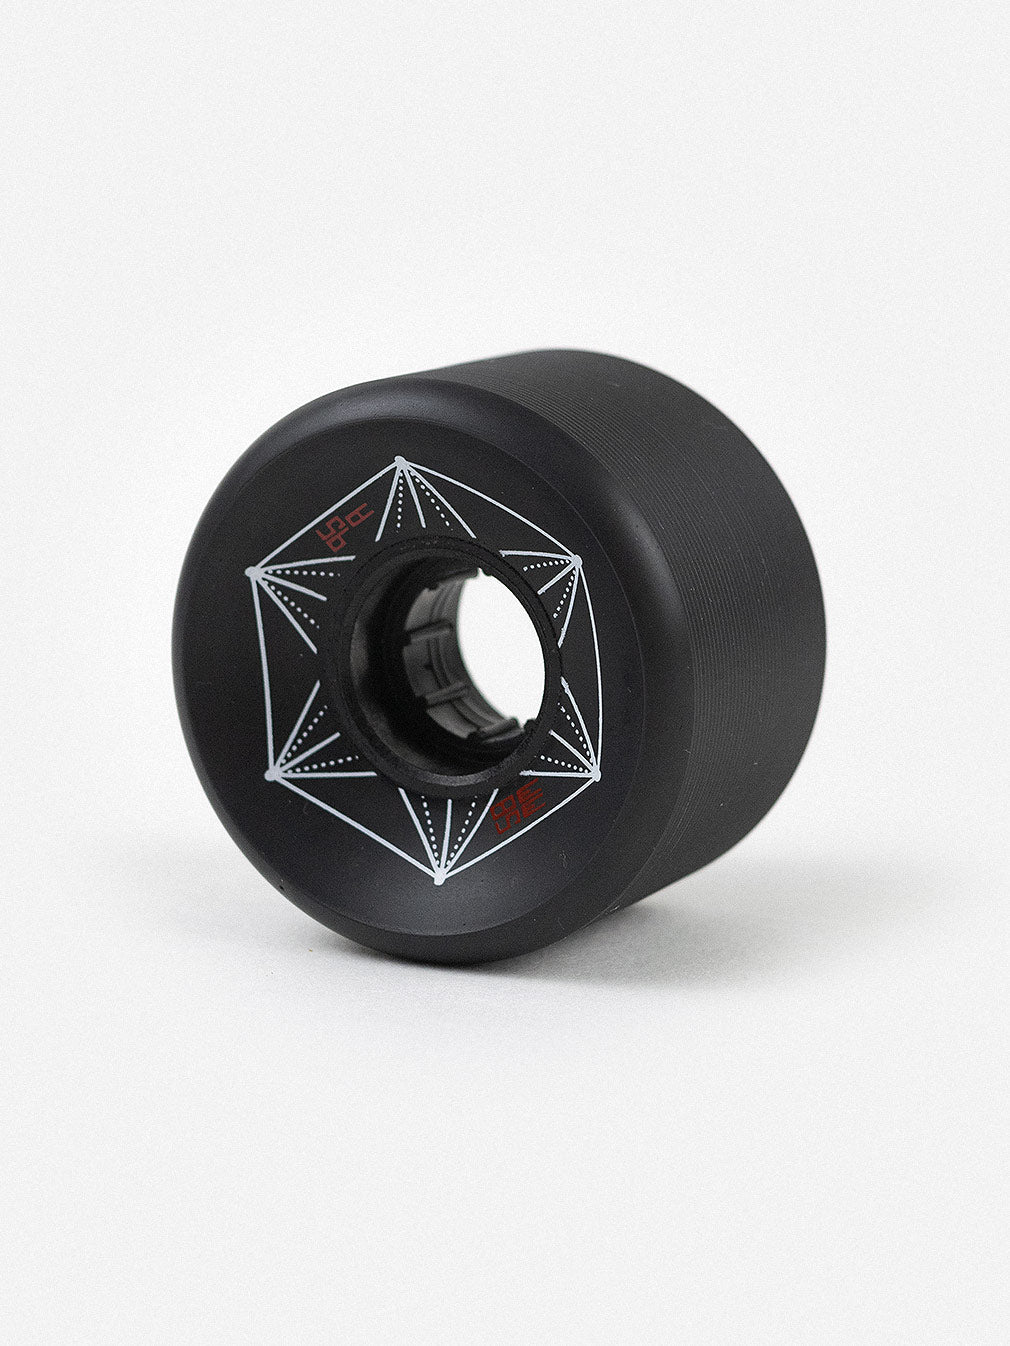 Roundhouse Park Wheels Black, 58mm, 95A - Youth Lagoon